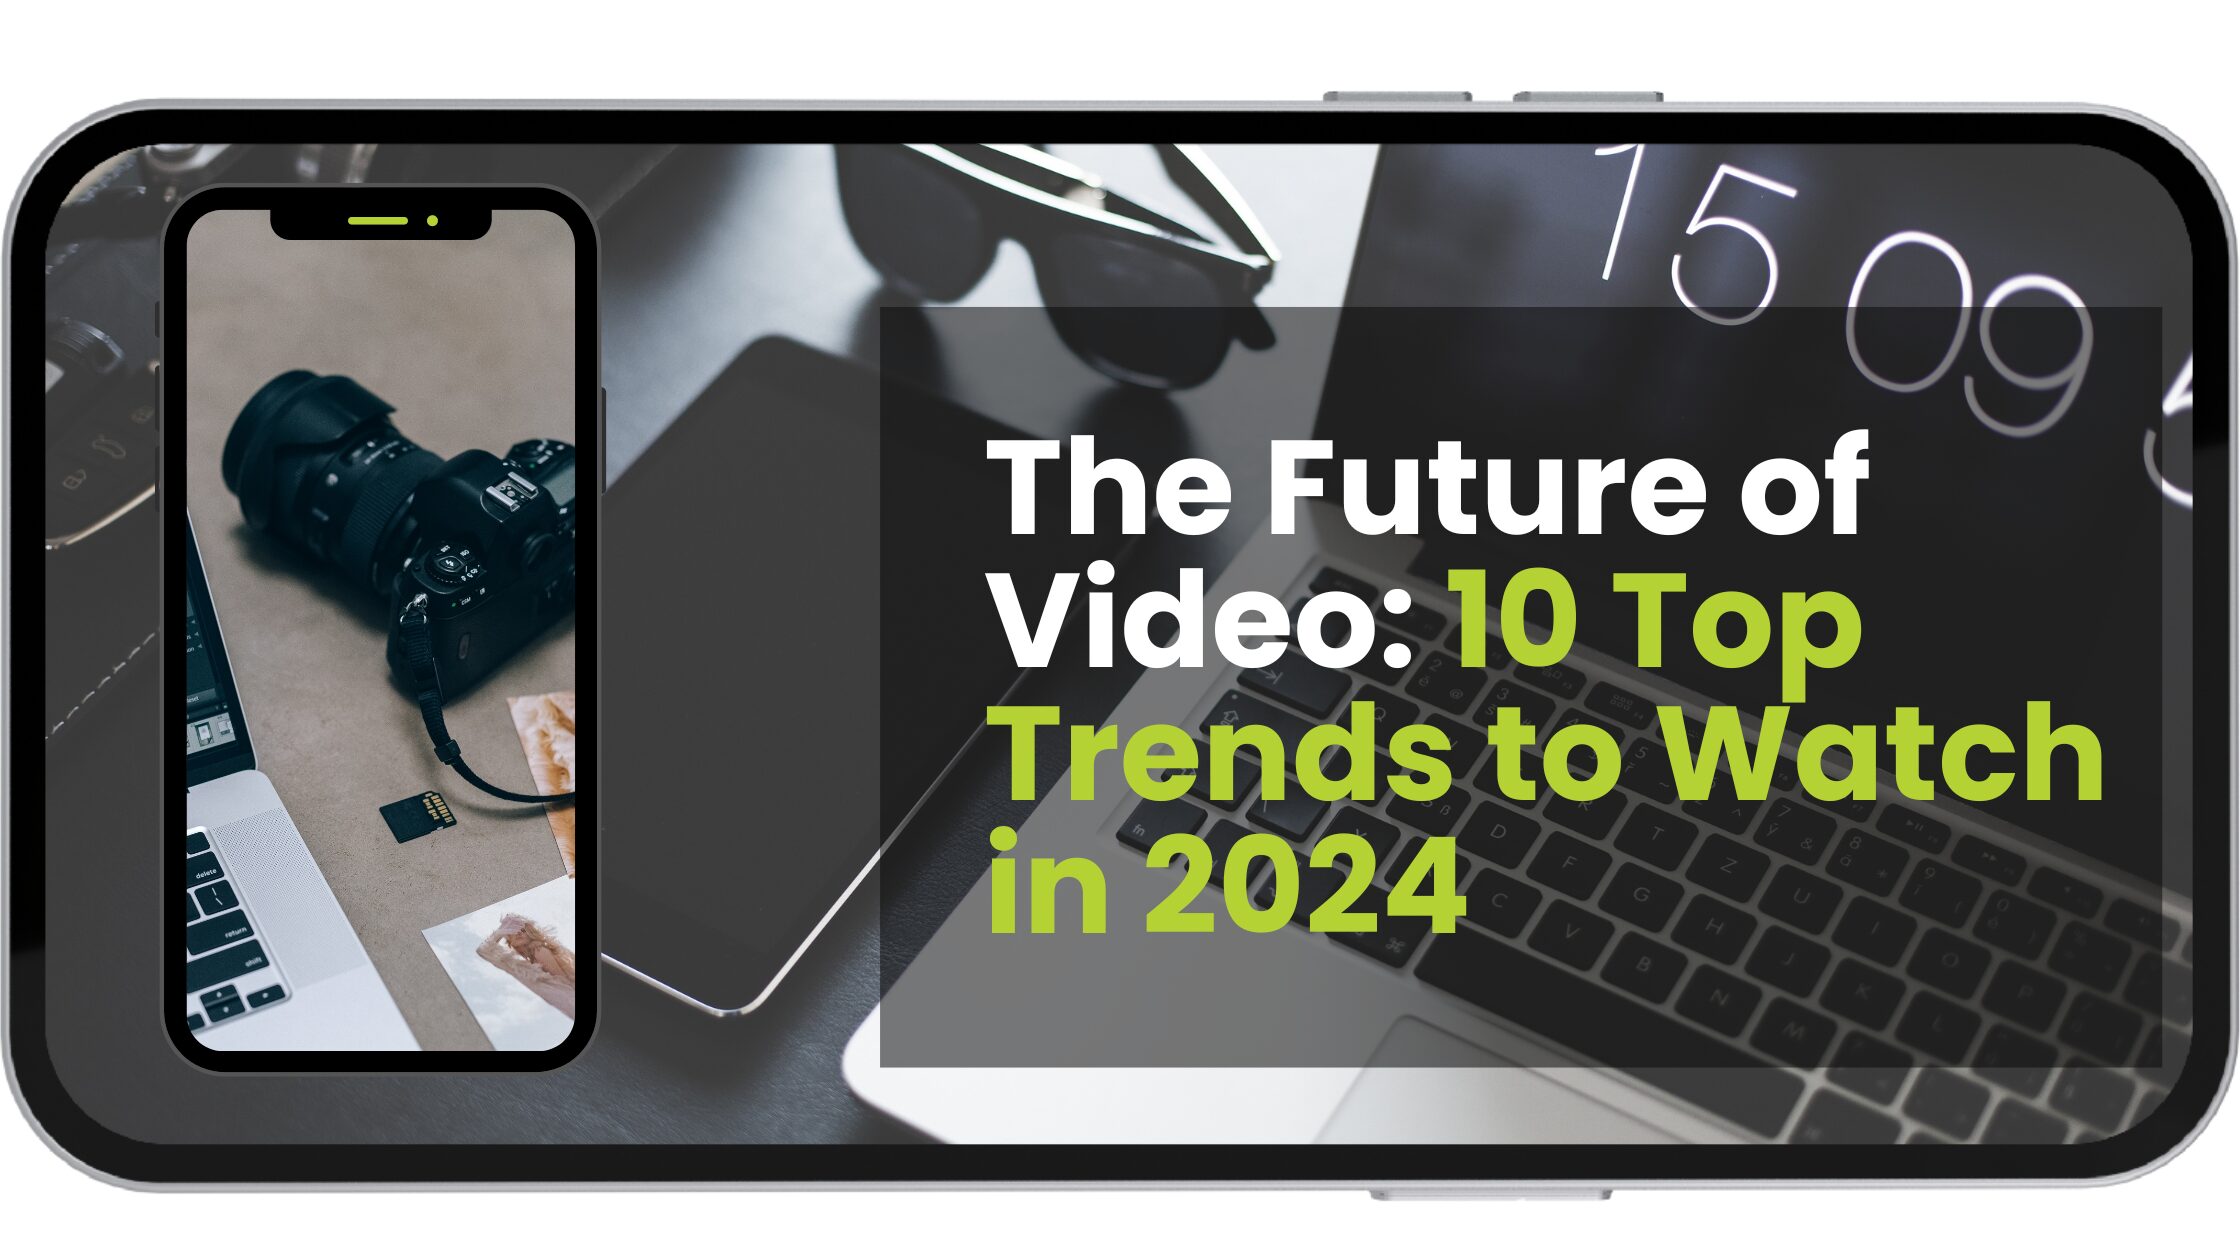 The Future of Video: 10 Top Trends to Watch in 2024